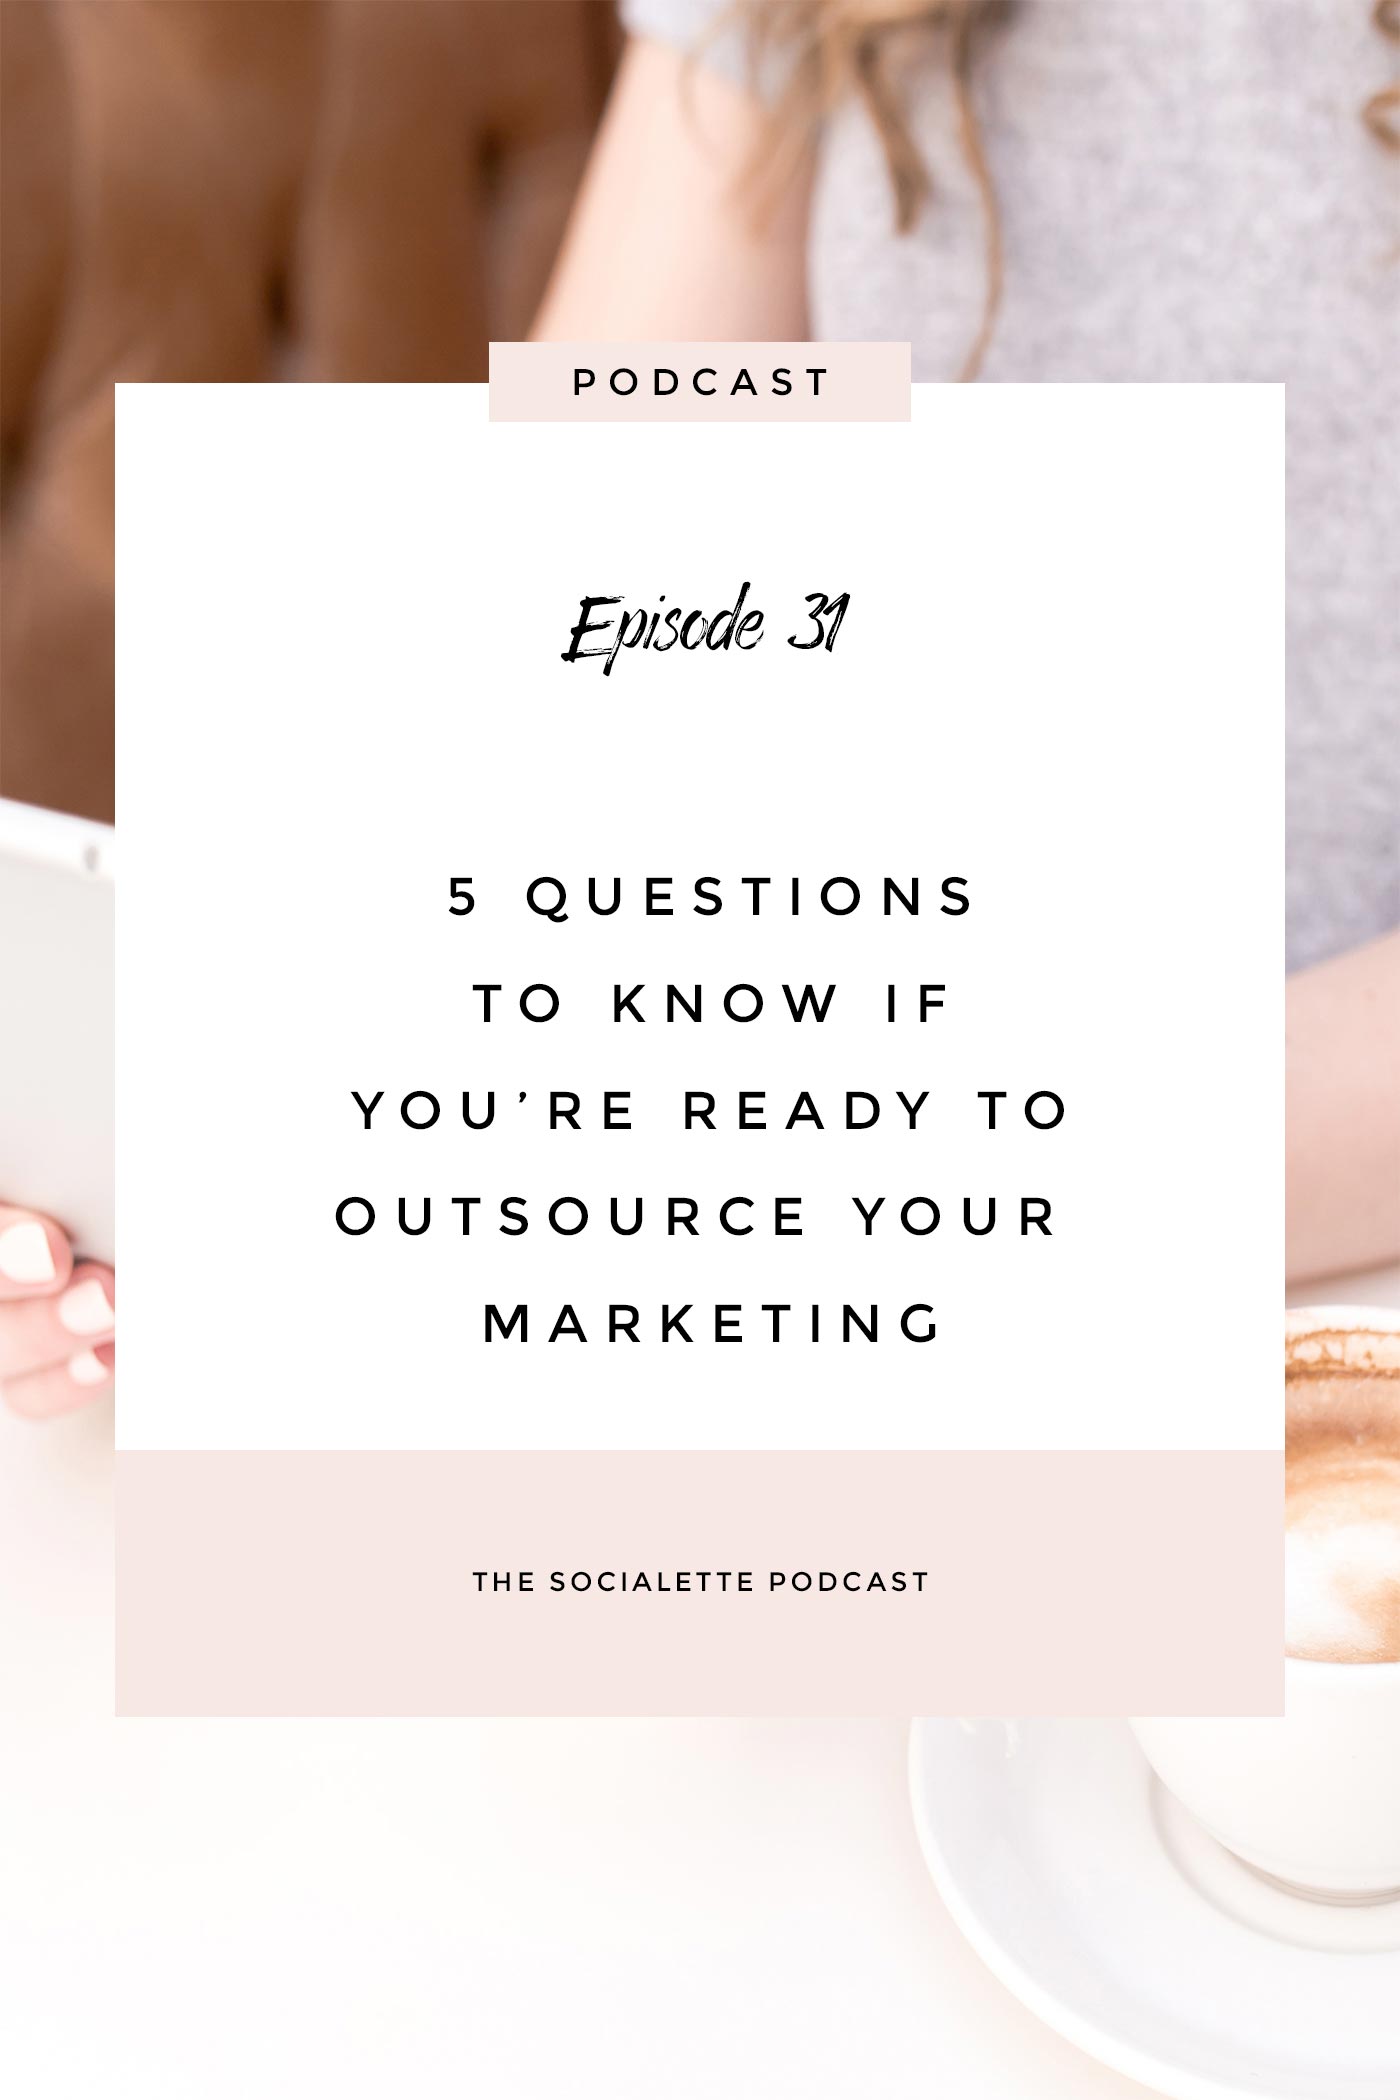 Know if you're ready to outsource your marketing